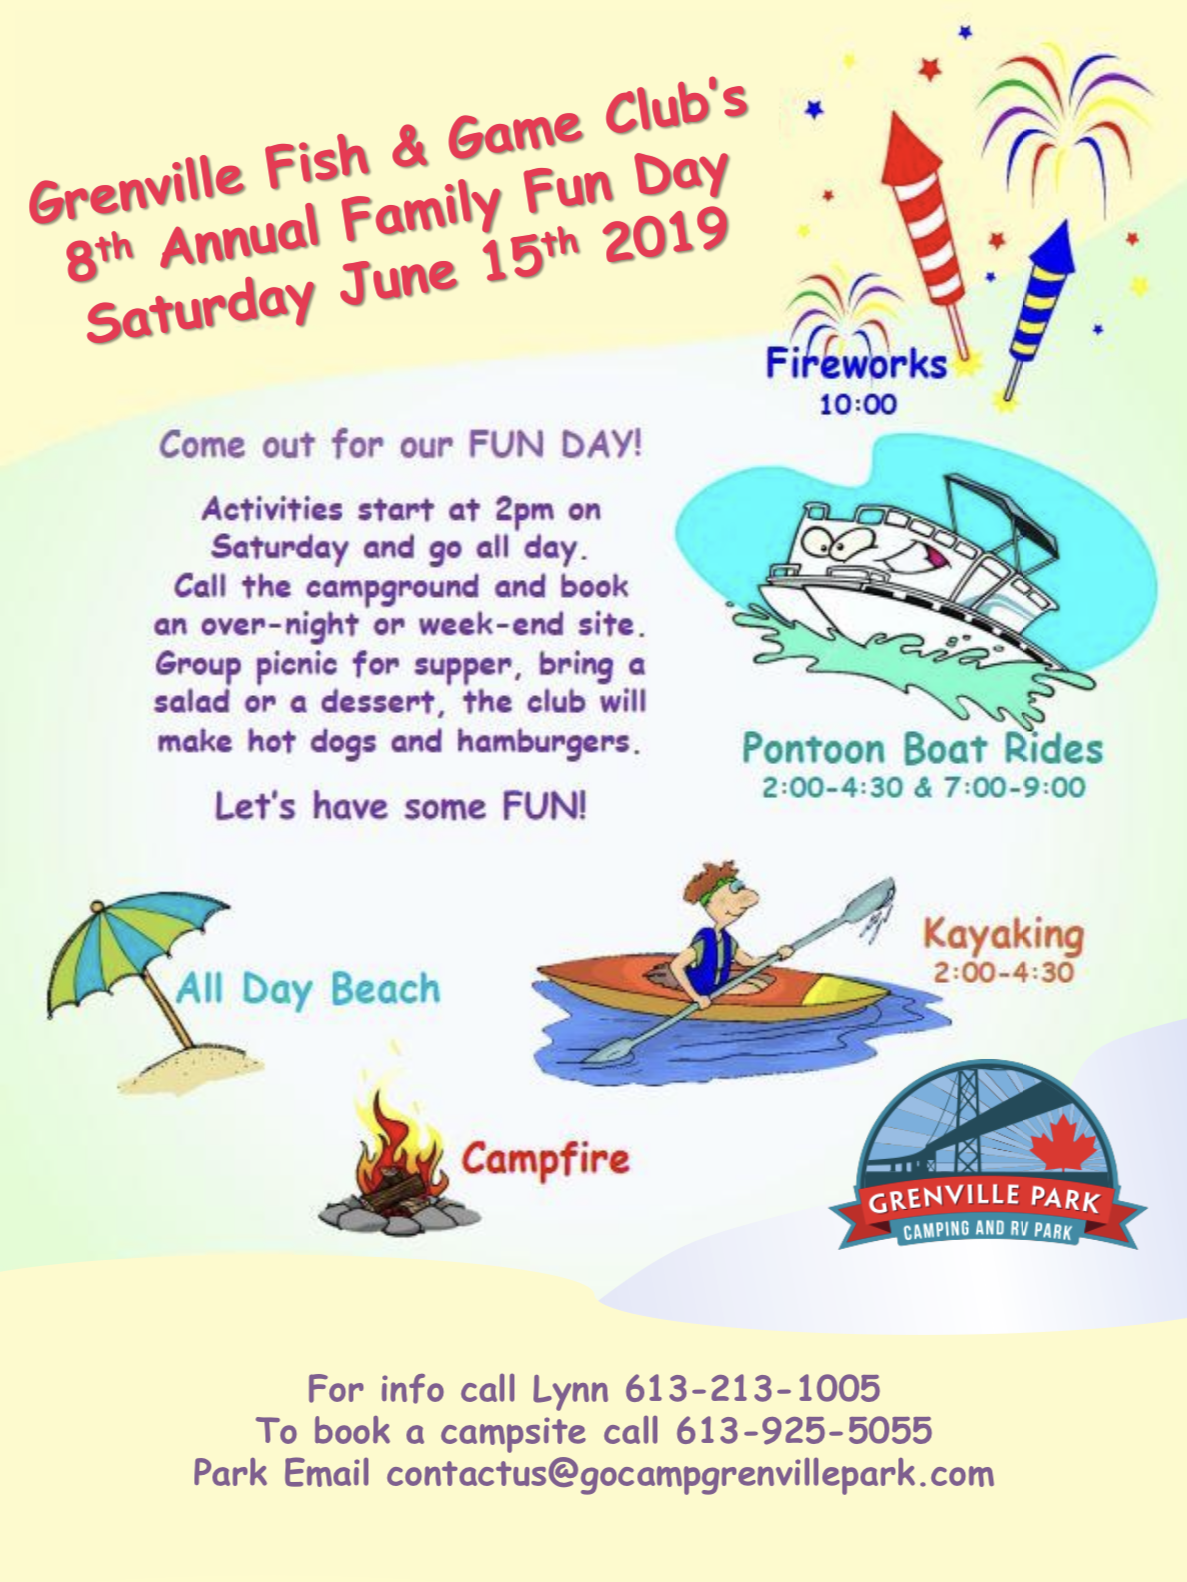 Grenville Fish & Game Club's 8th Annual Family Fun Day @ Grenville Park Camping & RV Park | Johnstown | Ontario | Canada